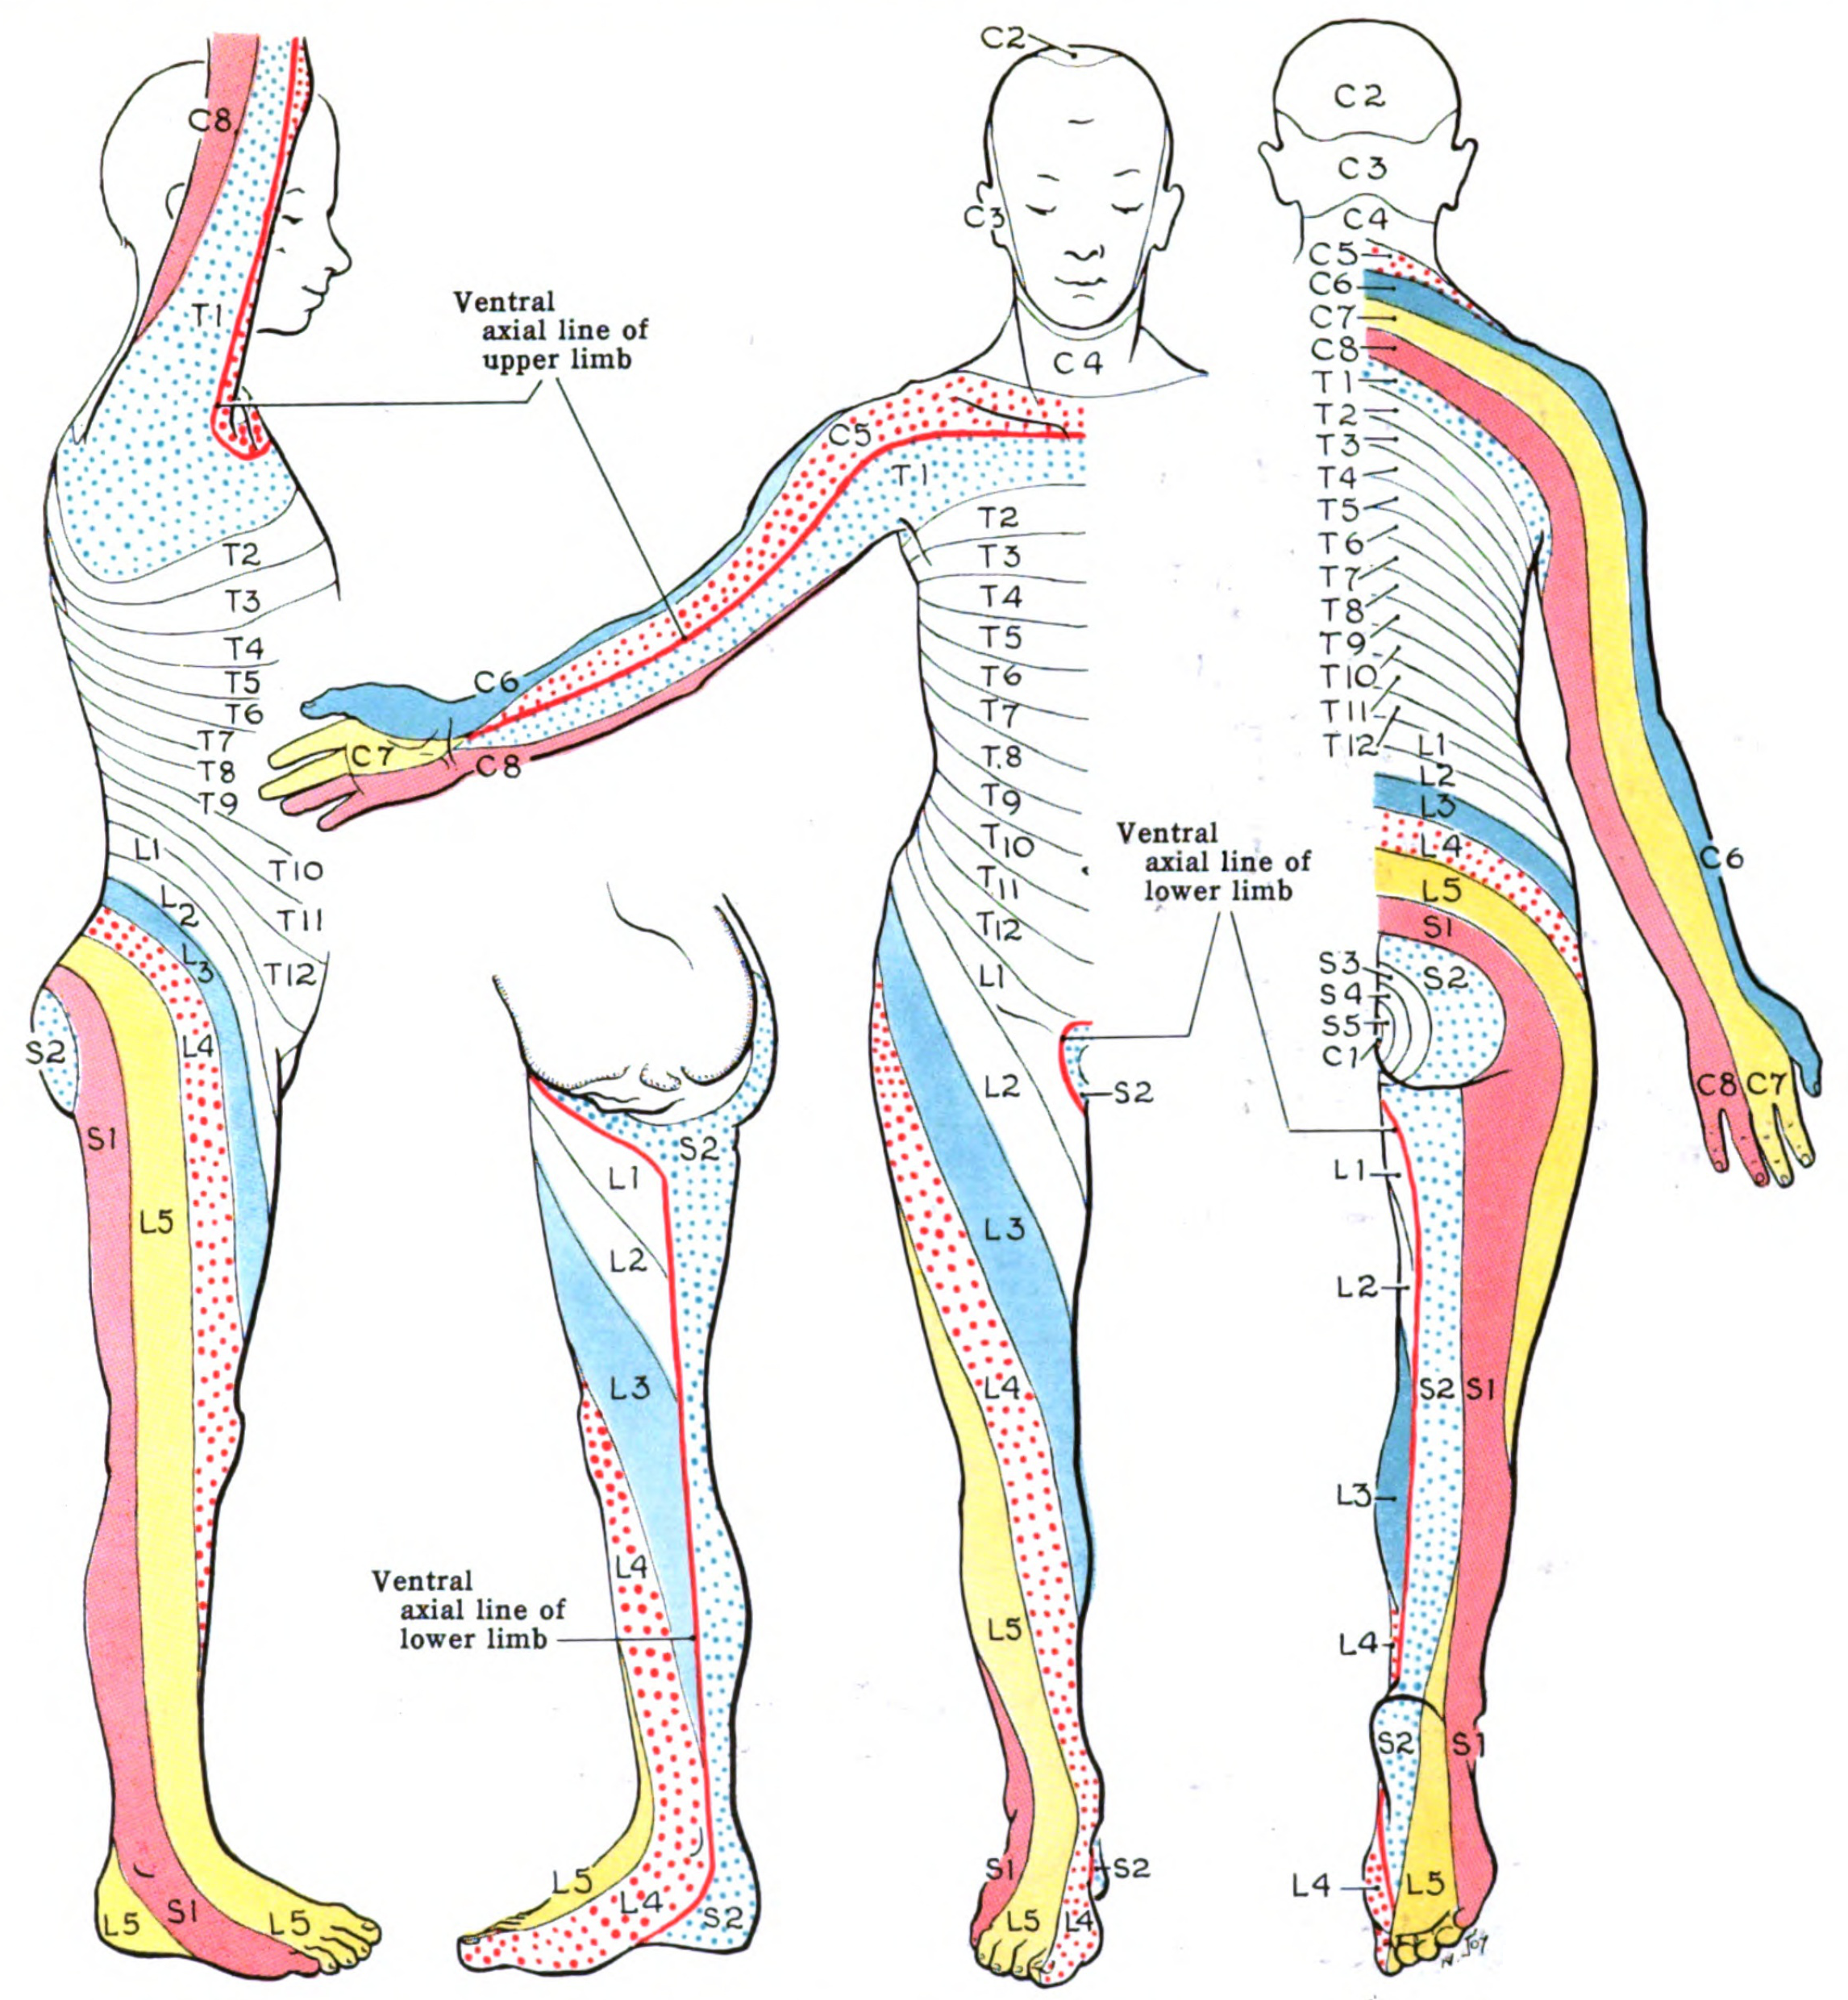 an illustration of 4 different views of a person standing in an anatomical position, showing ventral axial lines of upper and lower limbs